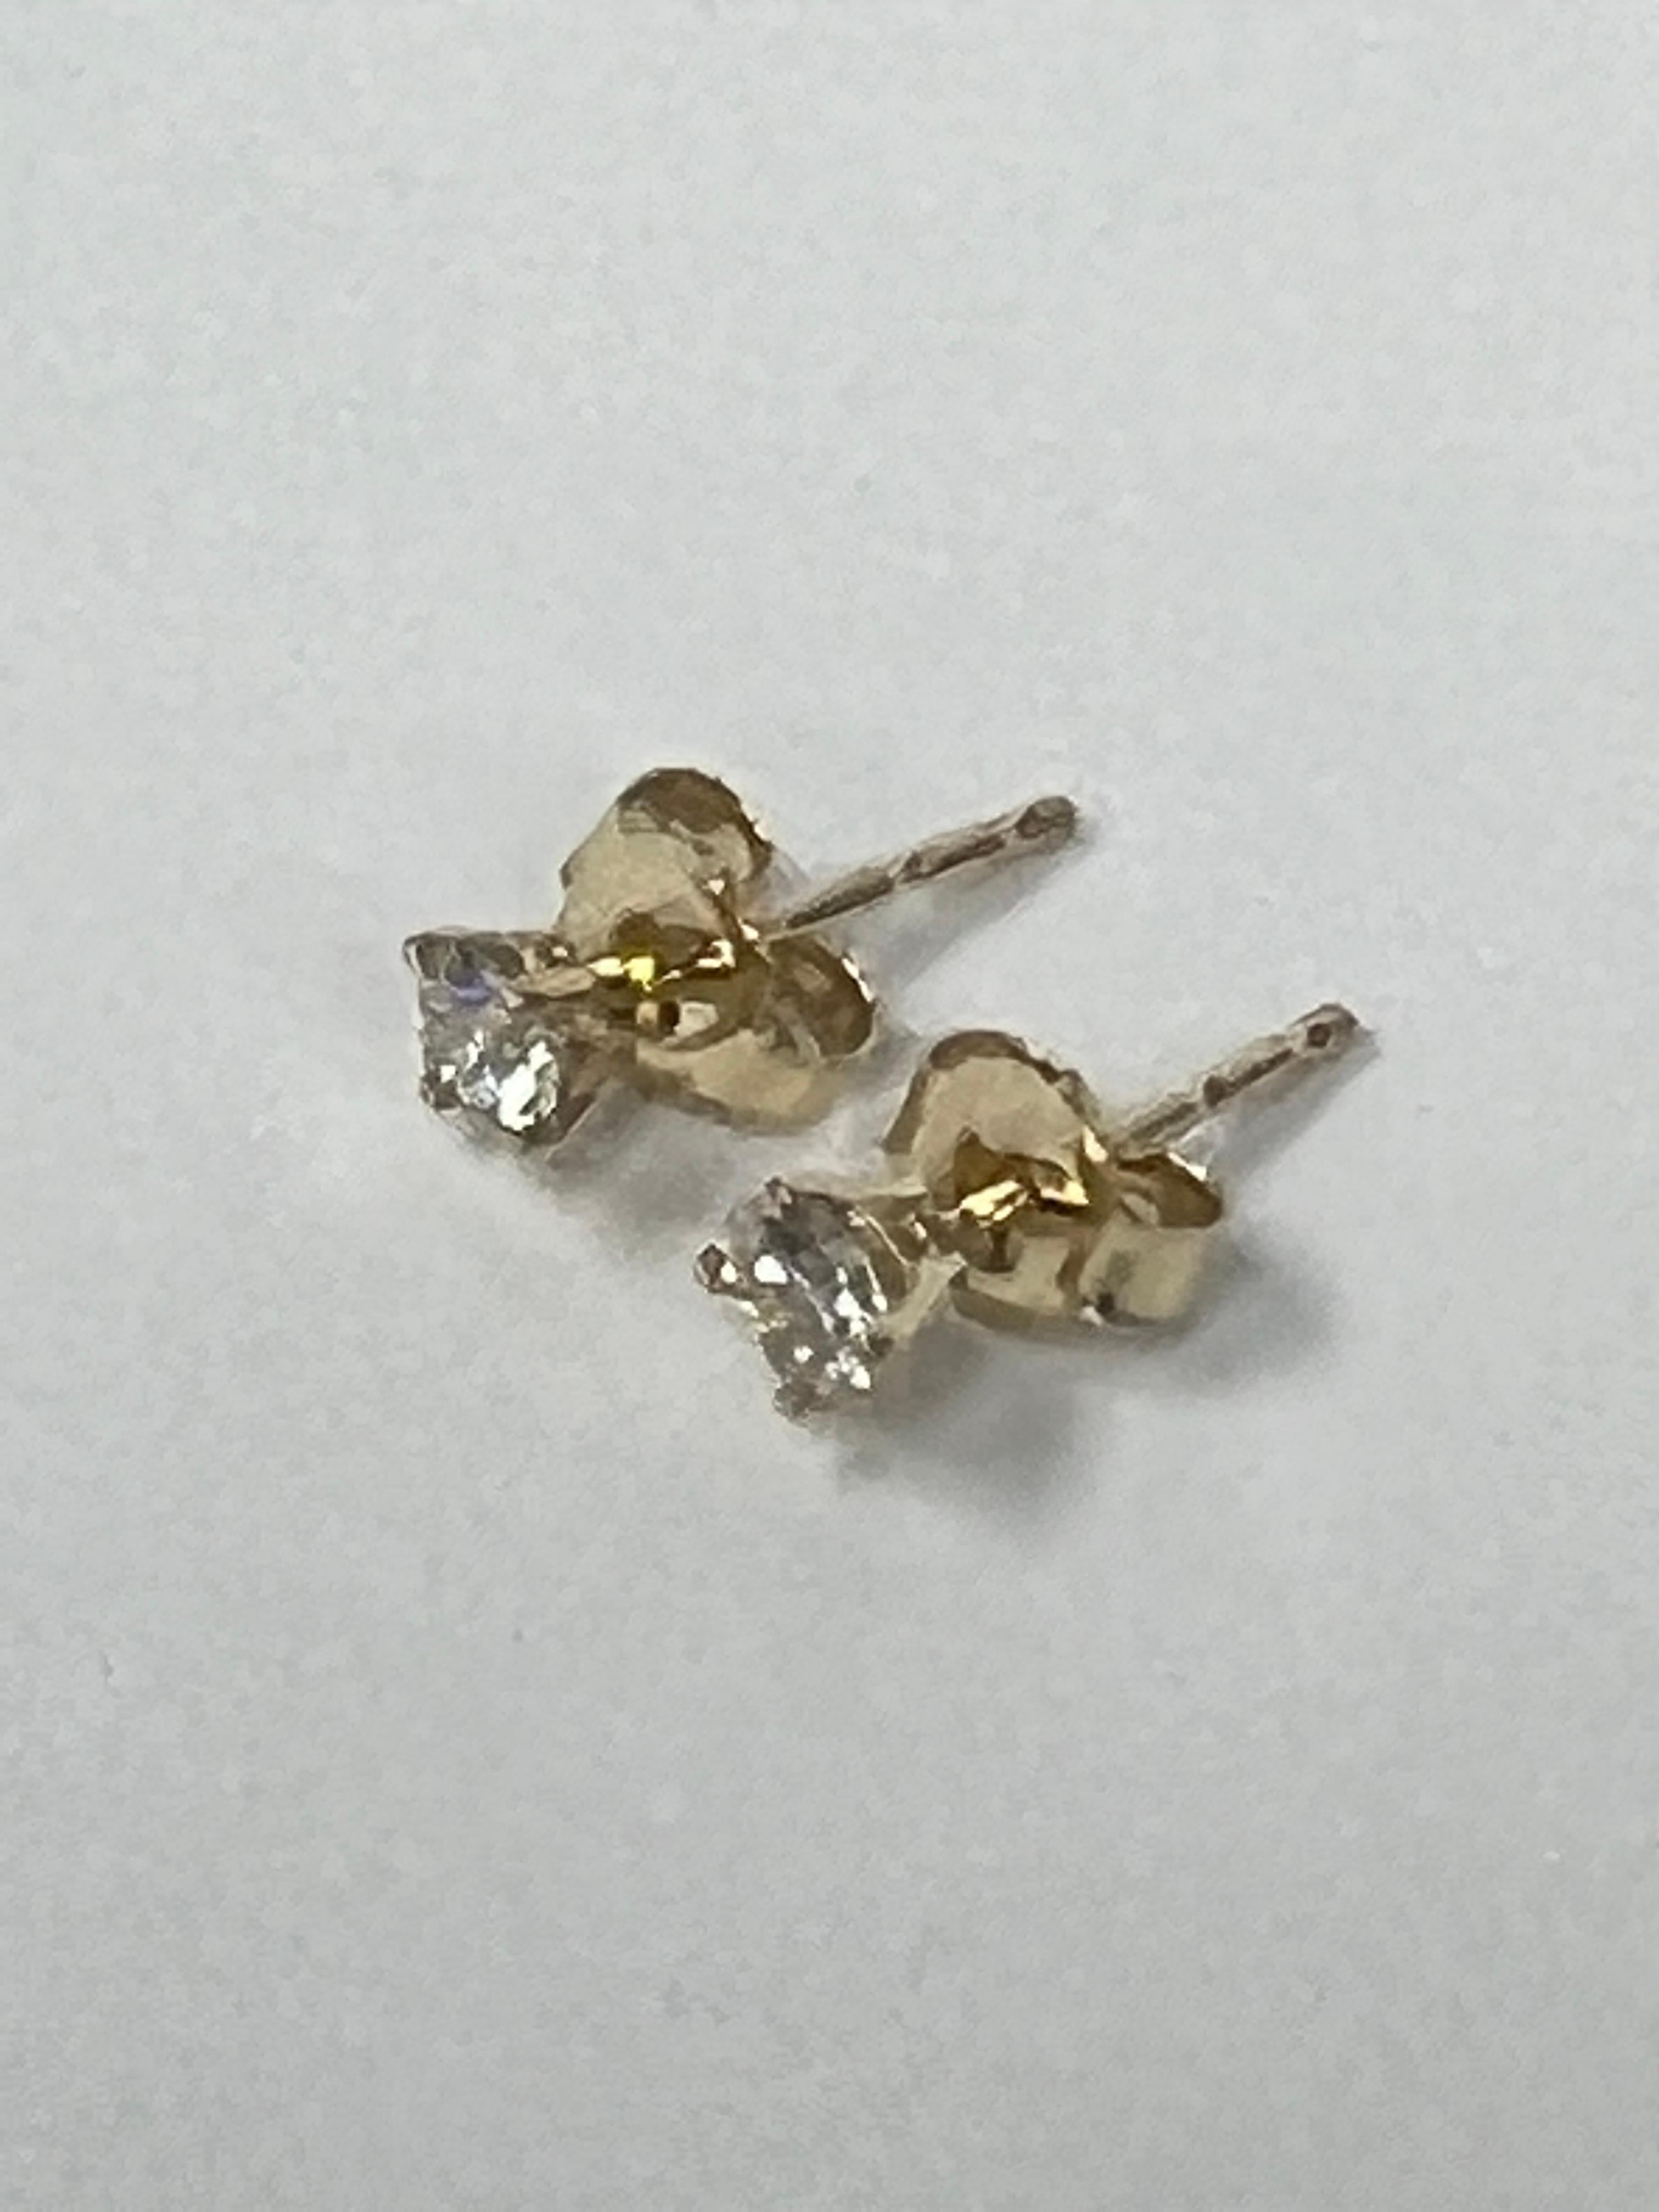 With these exquisite diamond studs, style and glamour are in the spotlight. These studs are set in 14-karat gold. The color of the diamonds is SI. The clarity is VS2-SI1. It is made out of 2 diamonds totaling 0.25 carats (1/4CT). It is set in a